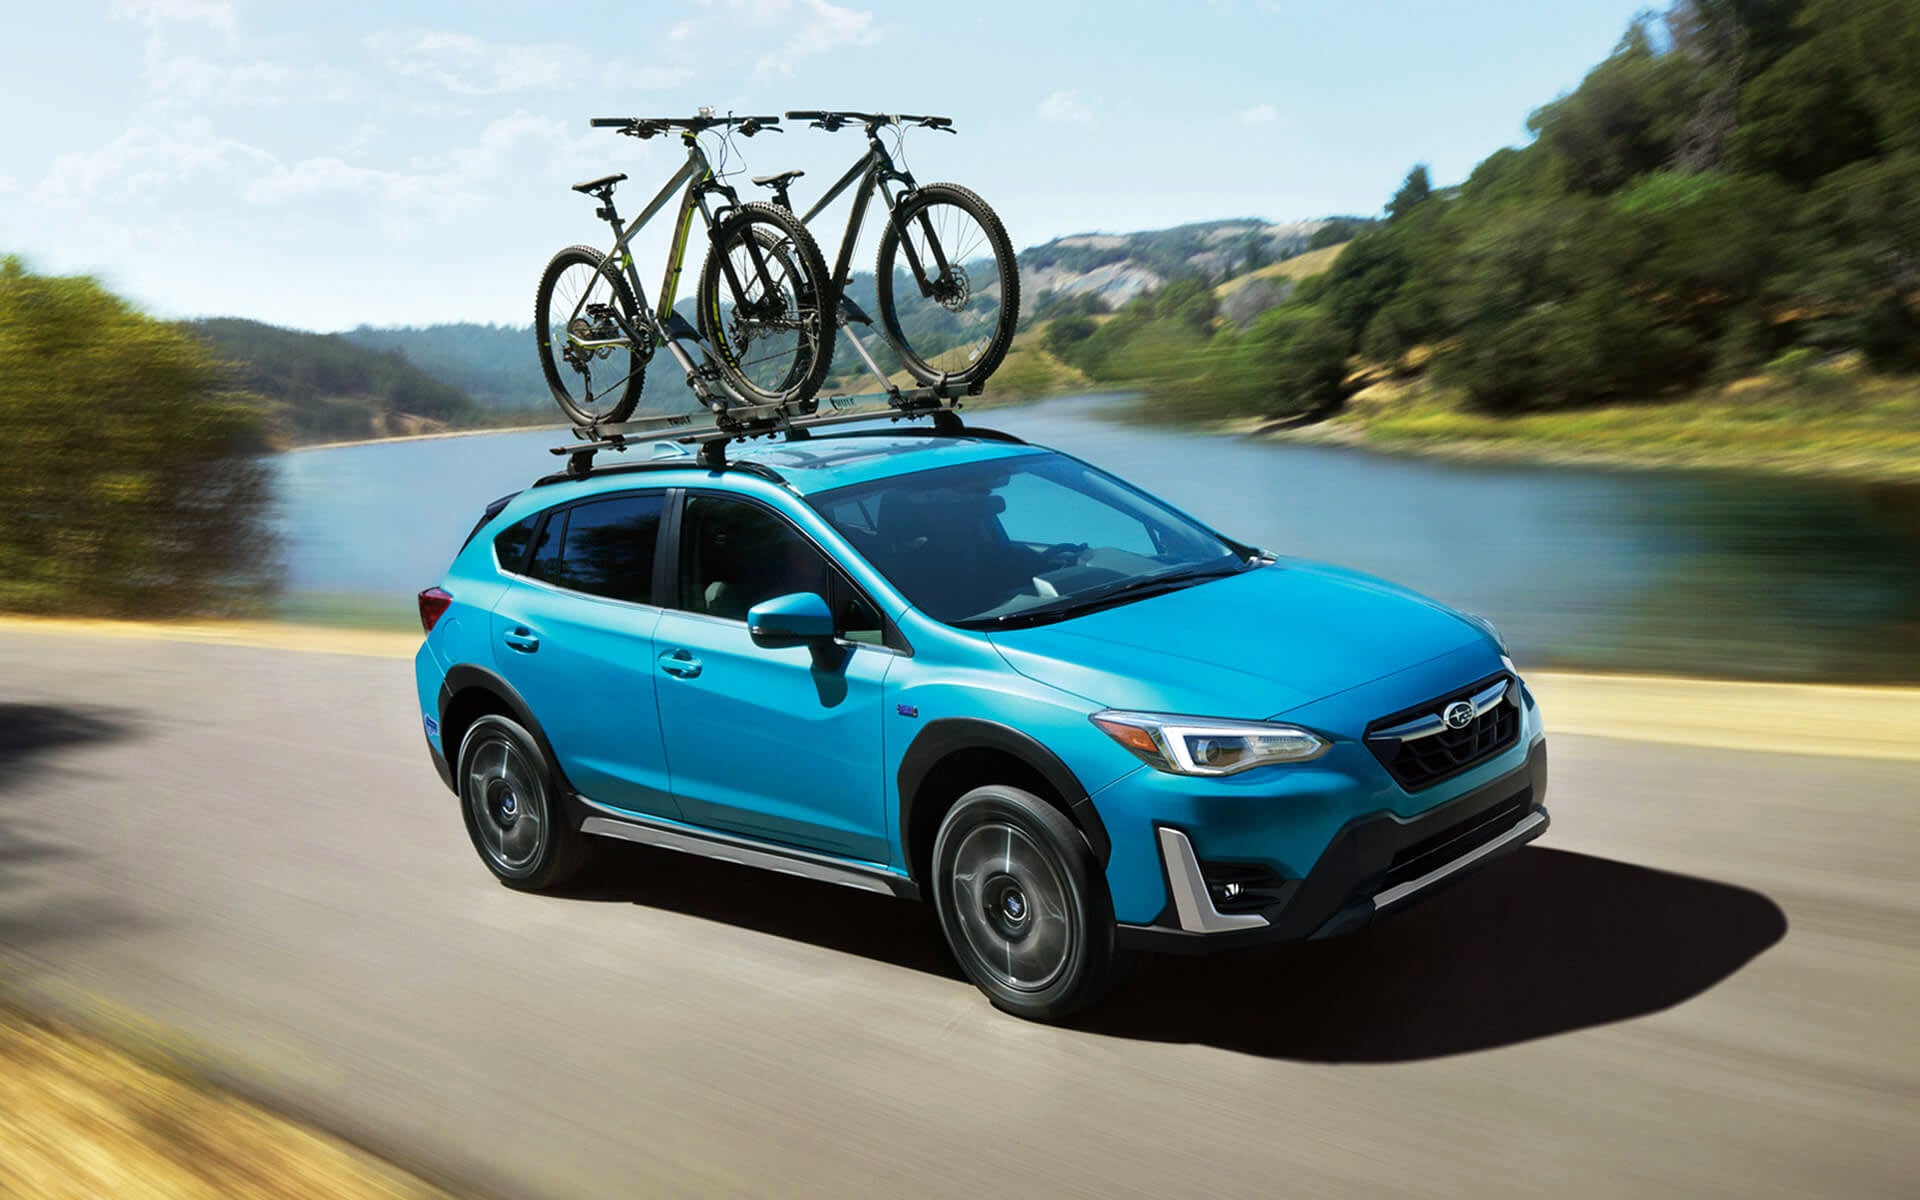 A blue Crosstrek Hybrid with two bicycles on its roof rack driving beside a river | Briggs Subaru of Topeka in Topeka KS